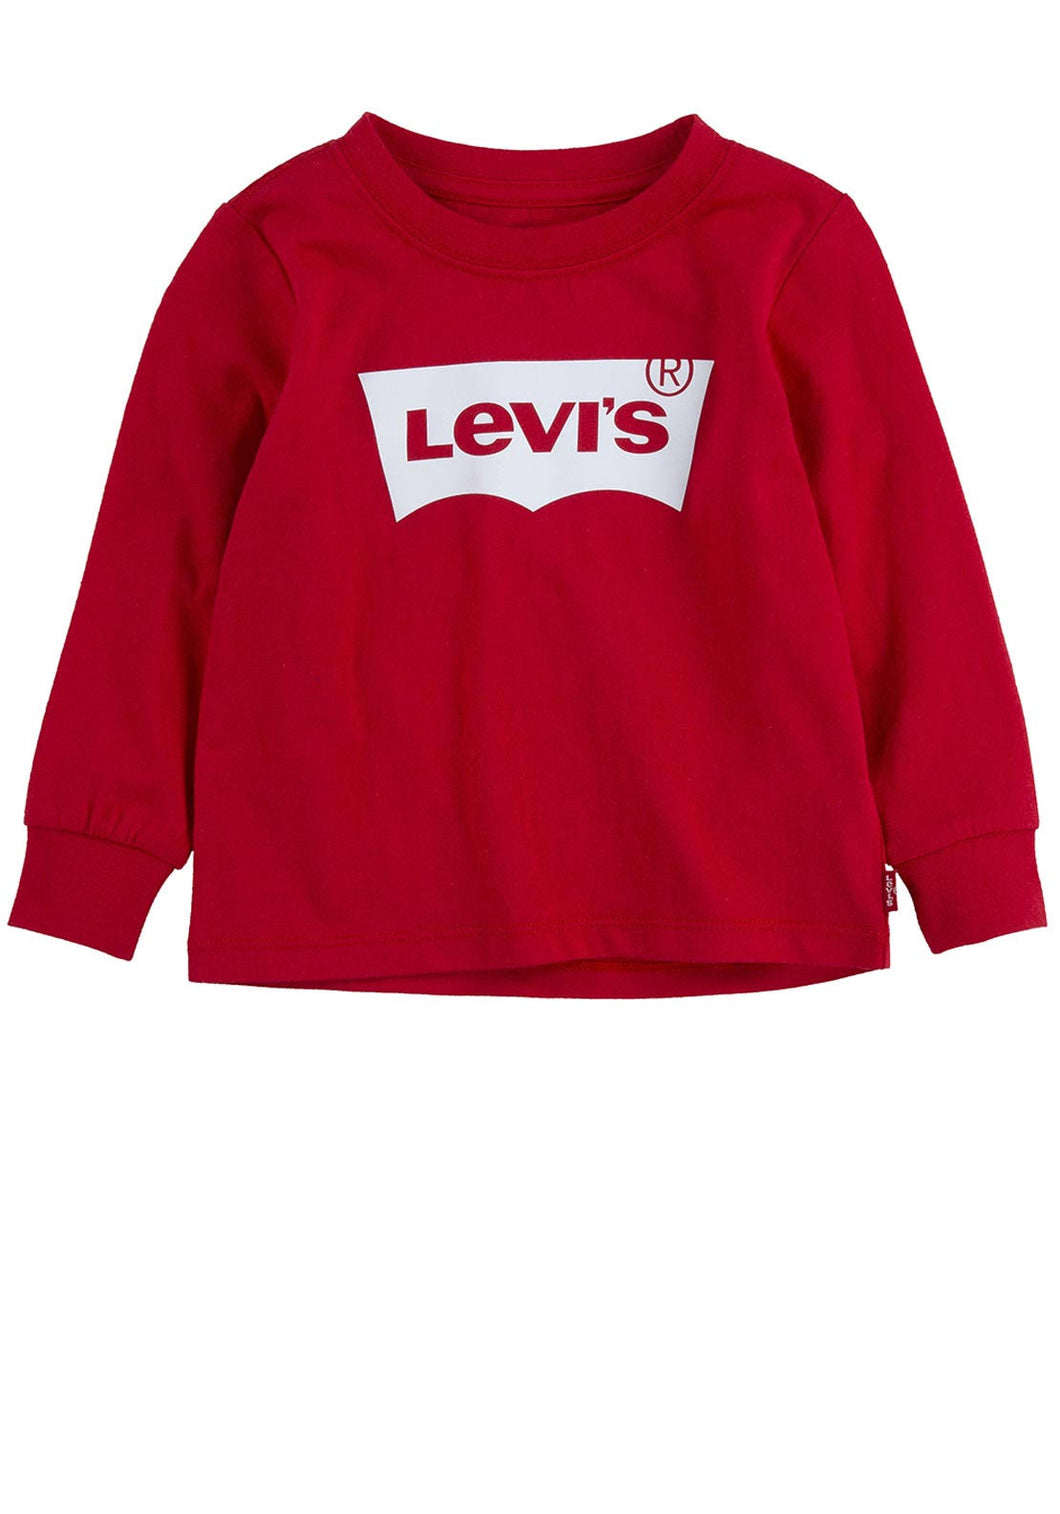 Levis Boys Red T-Shirt